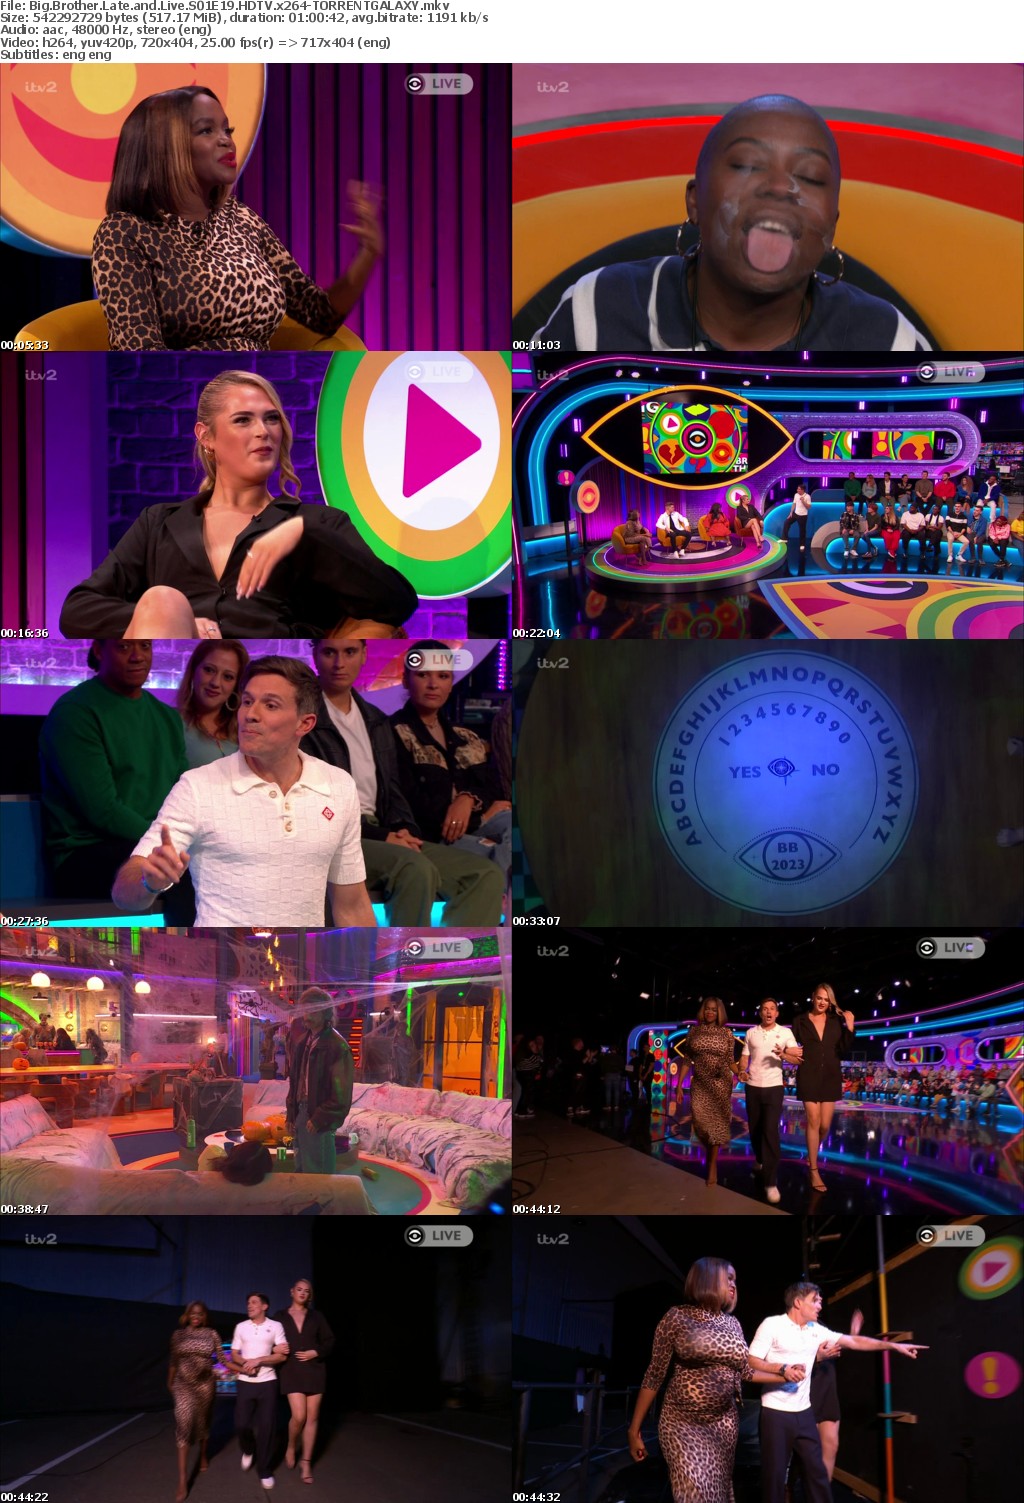 Big Brother Late and Live S01E19 HDTV x264-GALAXY